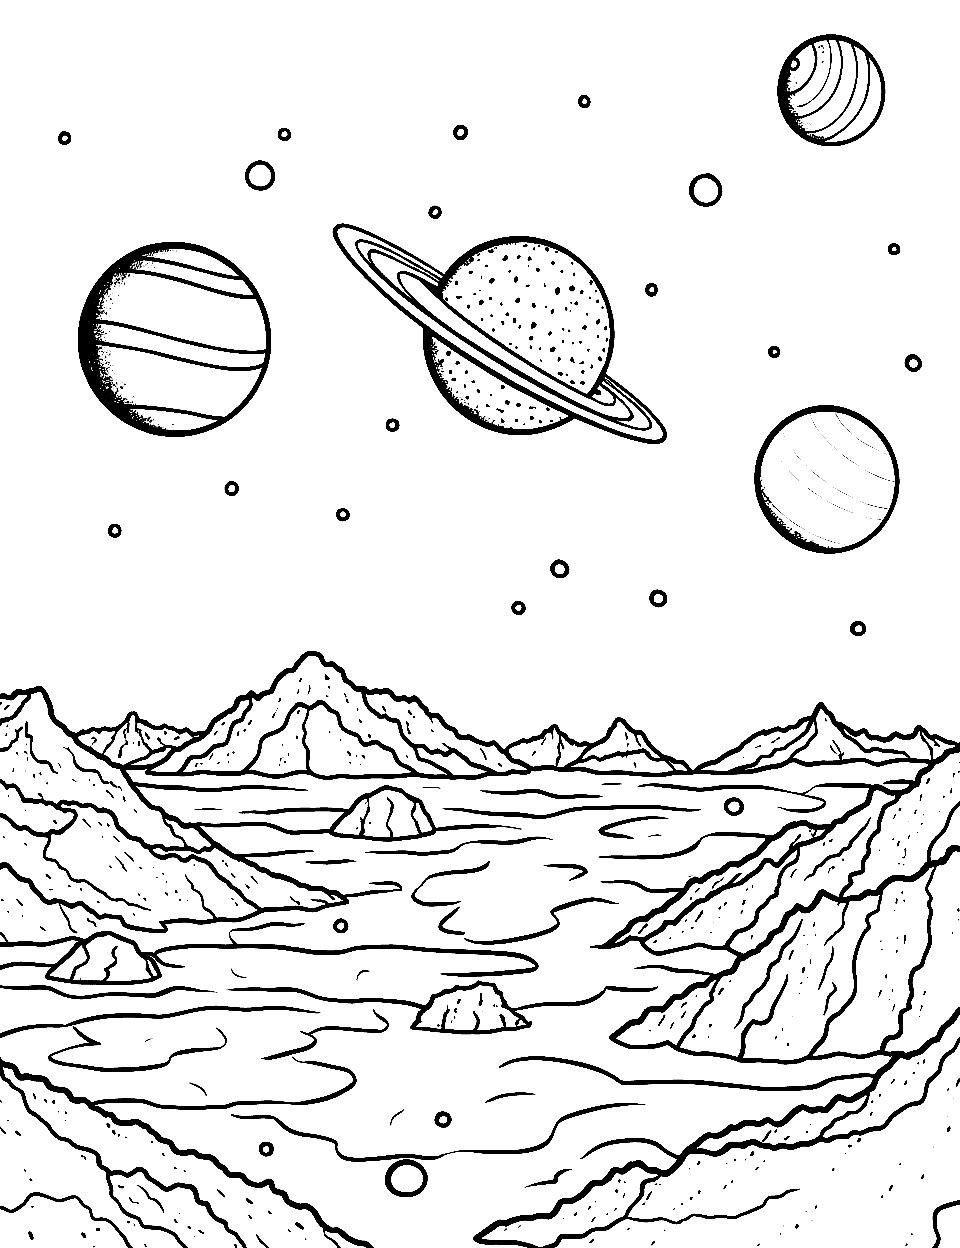 Venus' Volcanic Surface Solar System Coloring Page - The volcanic landscape of Venus with lava flows and craters.